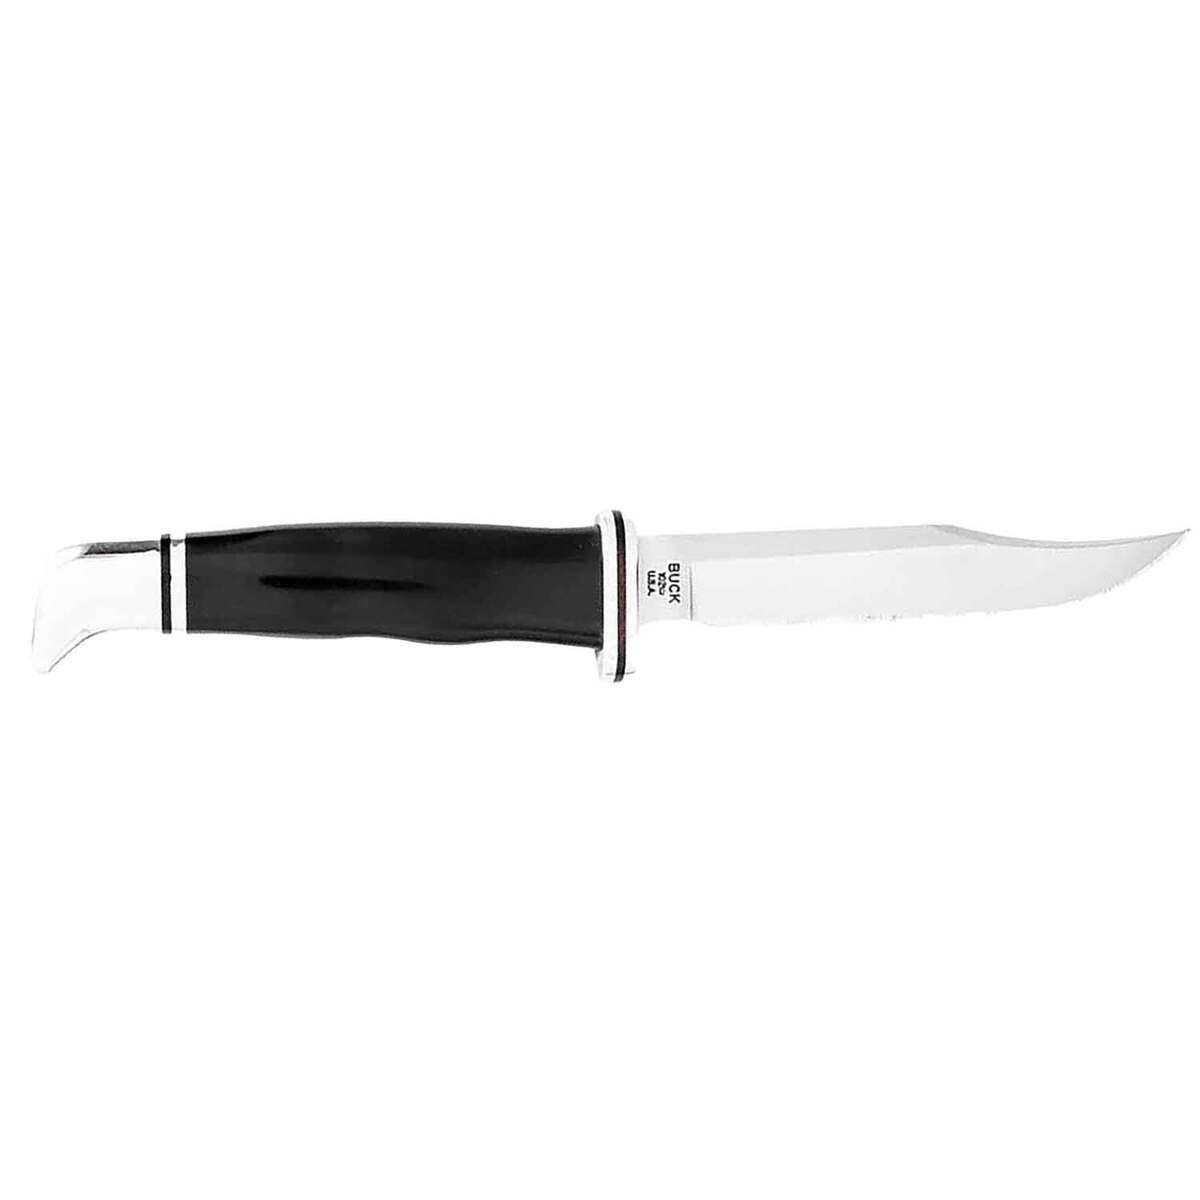 Serrated knife 102: Everything You Need to Know